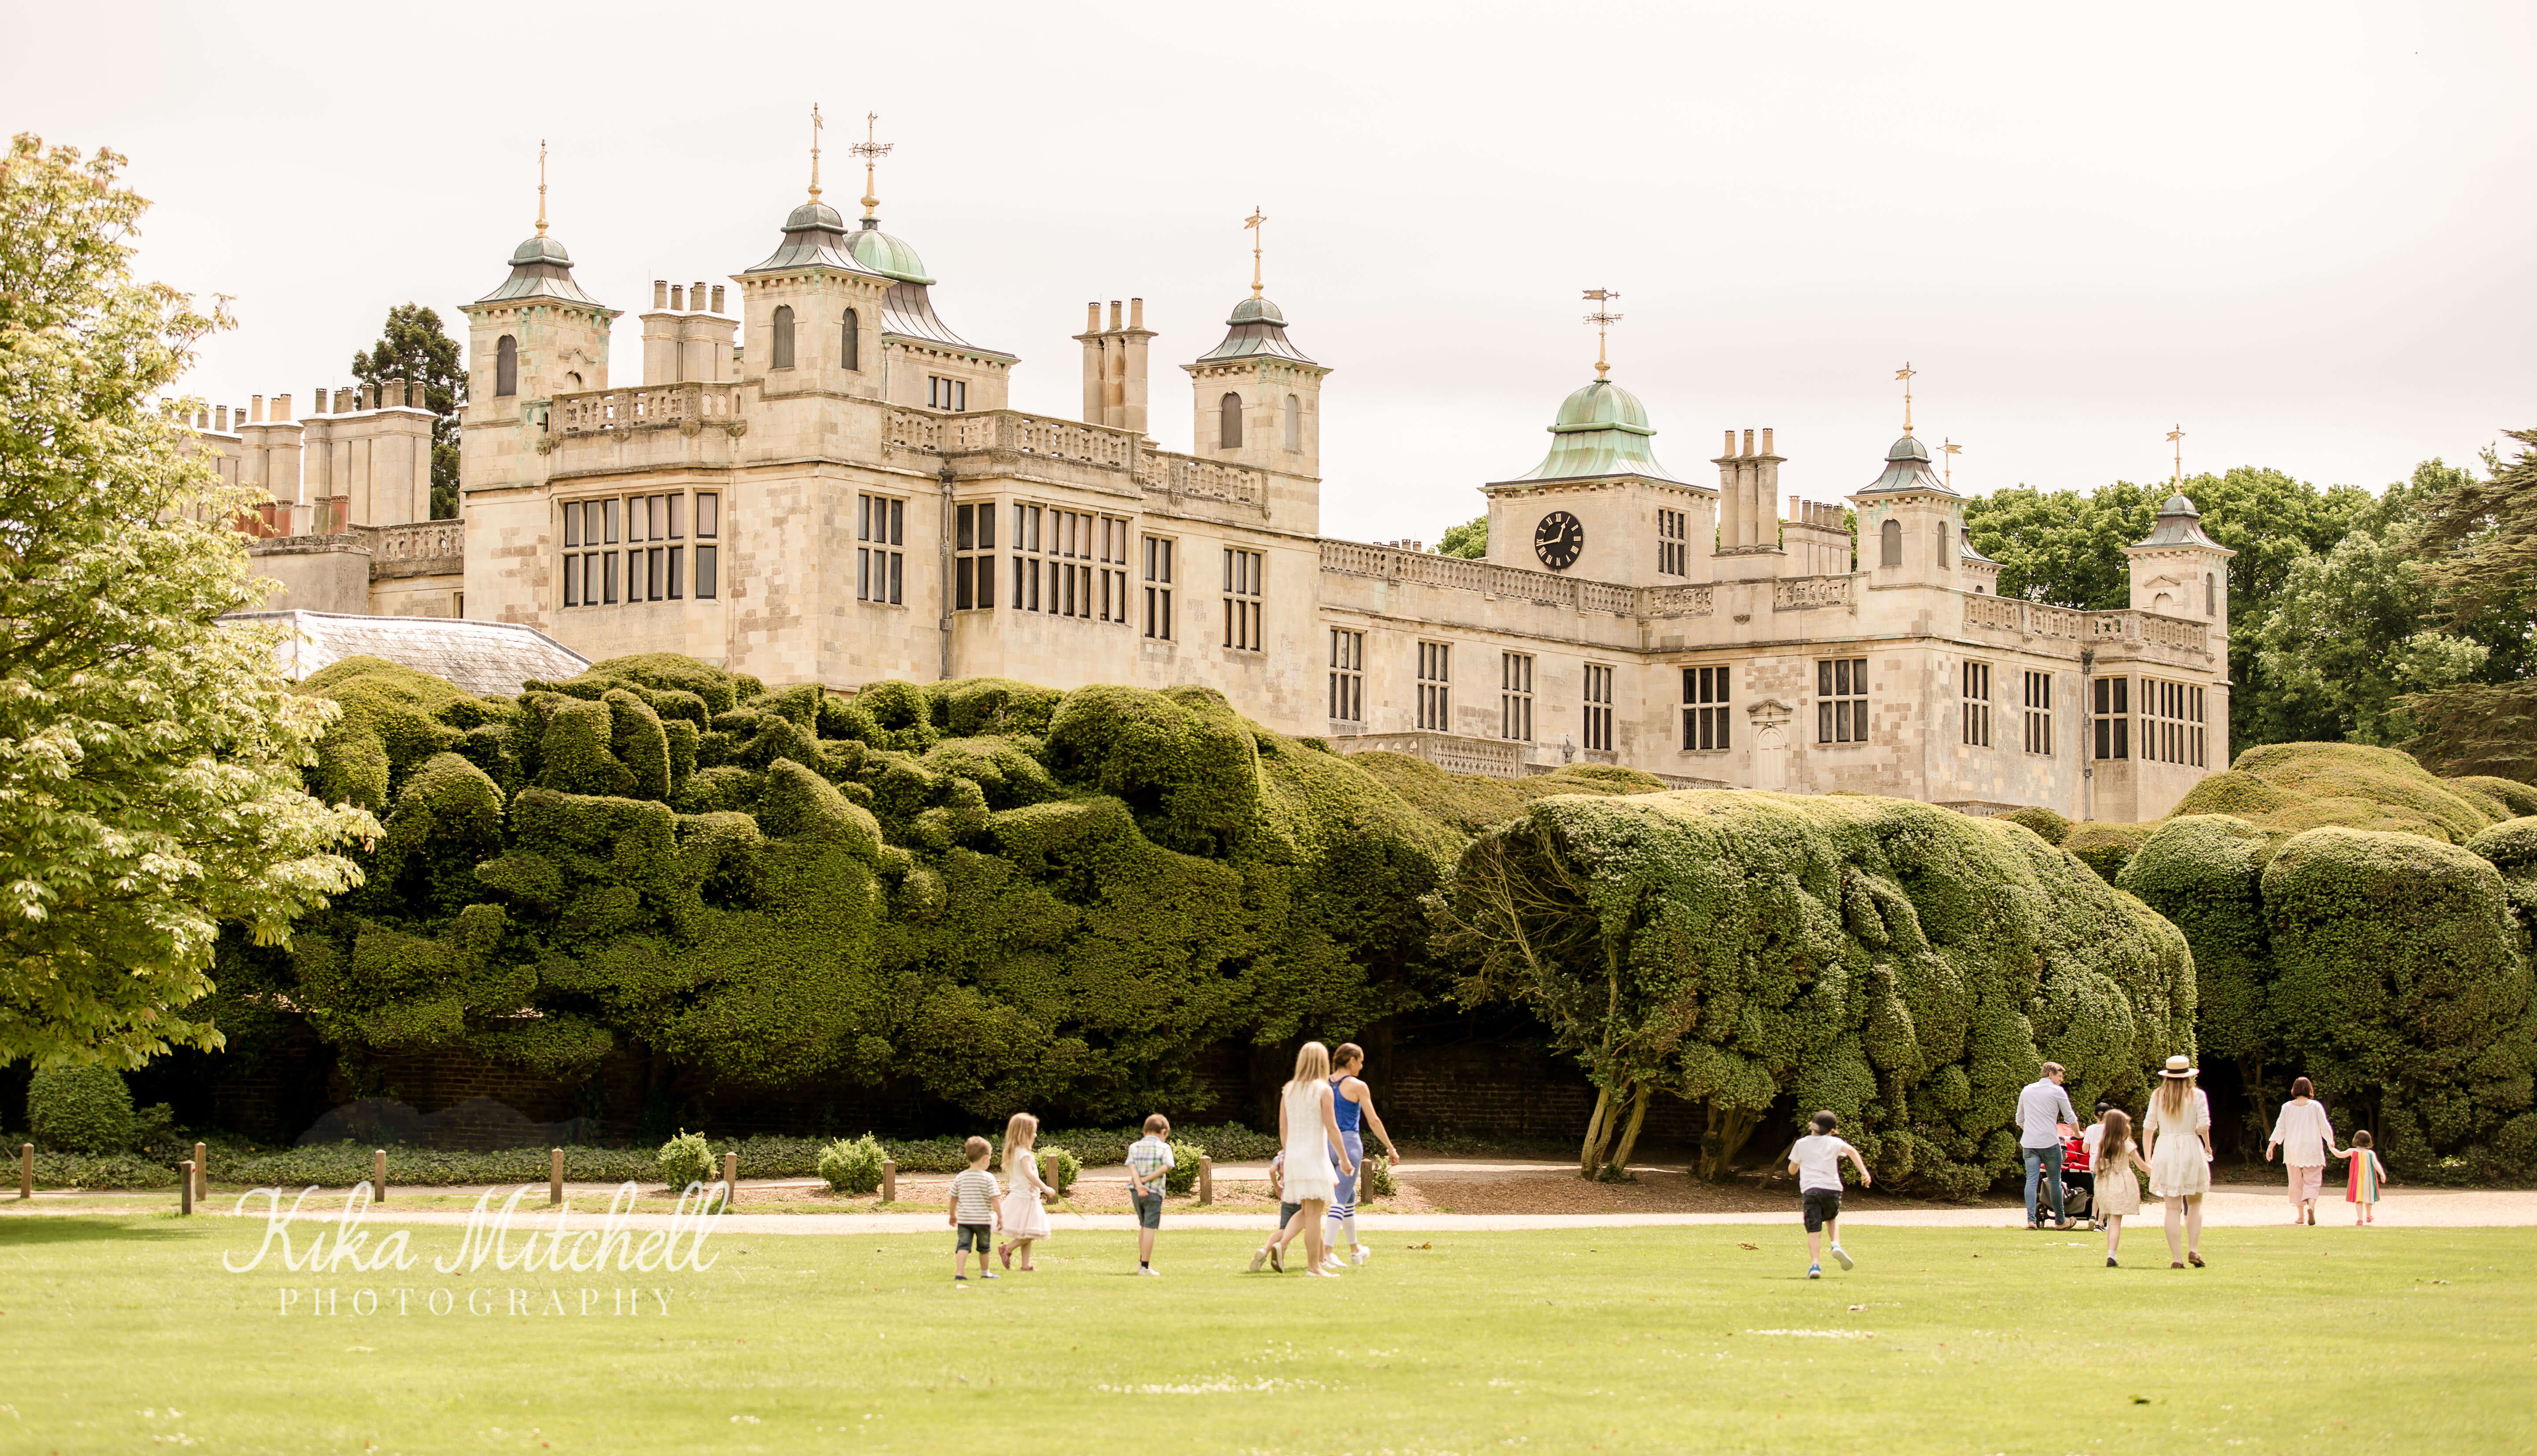 stunning Audley End house English heritage location in Chelmsford Essex, was used for a commercial photoshoot with families by Kika Mitchell Photography